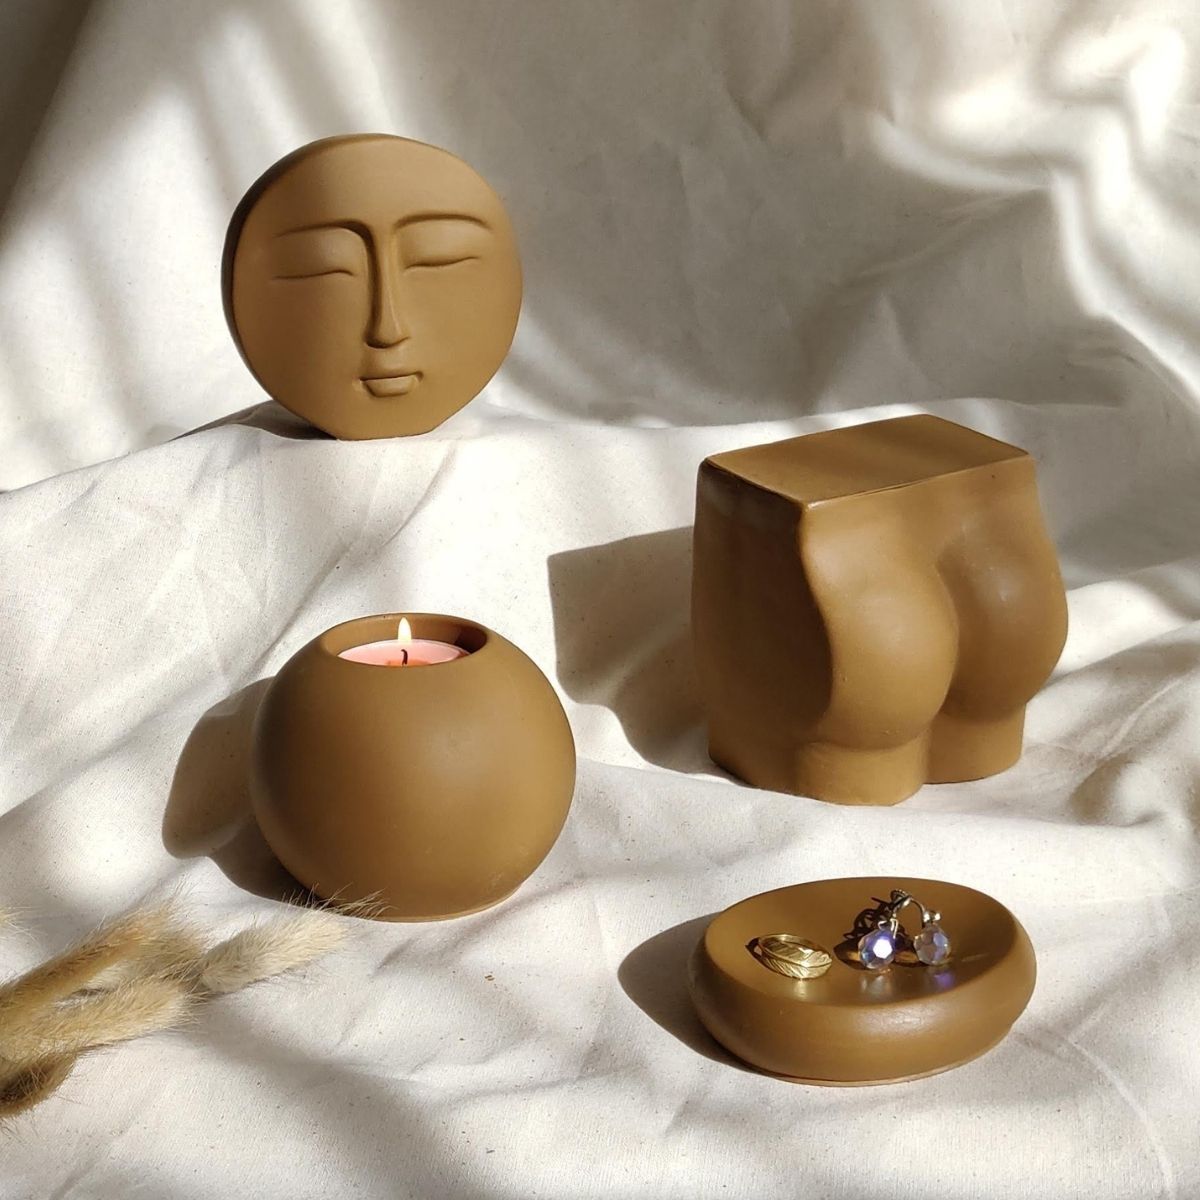 minimalist home decor made of concrete style material featuring trinket dish, tea light holder, and decorative ornaments